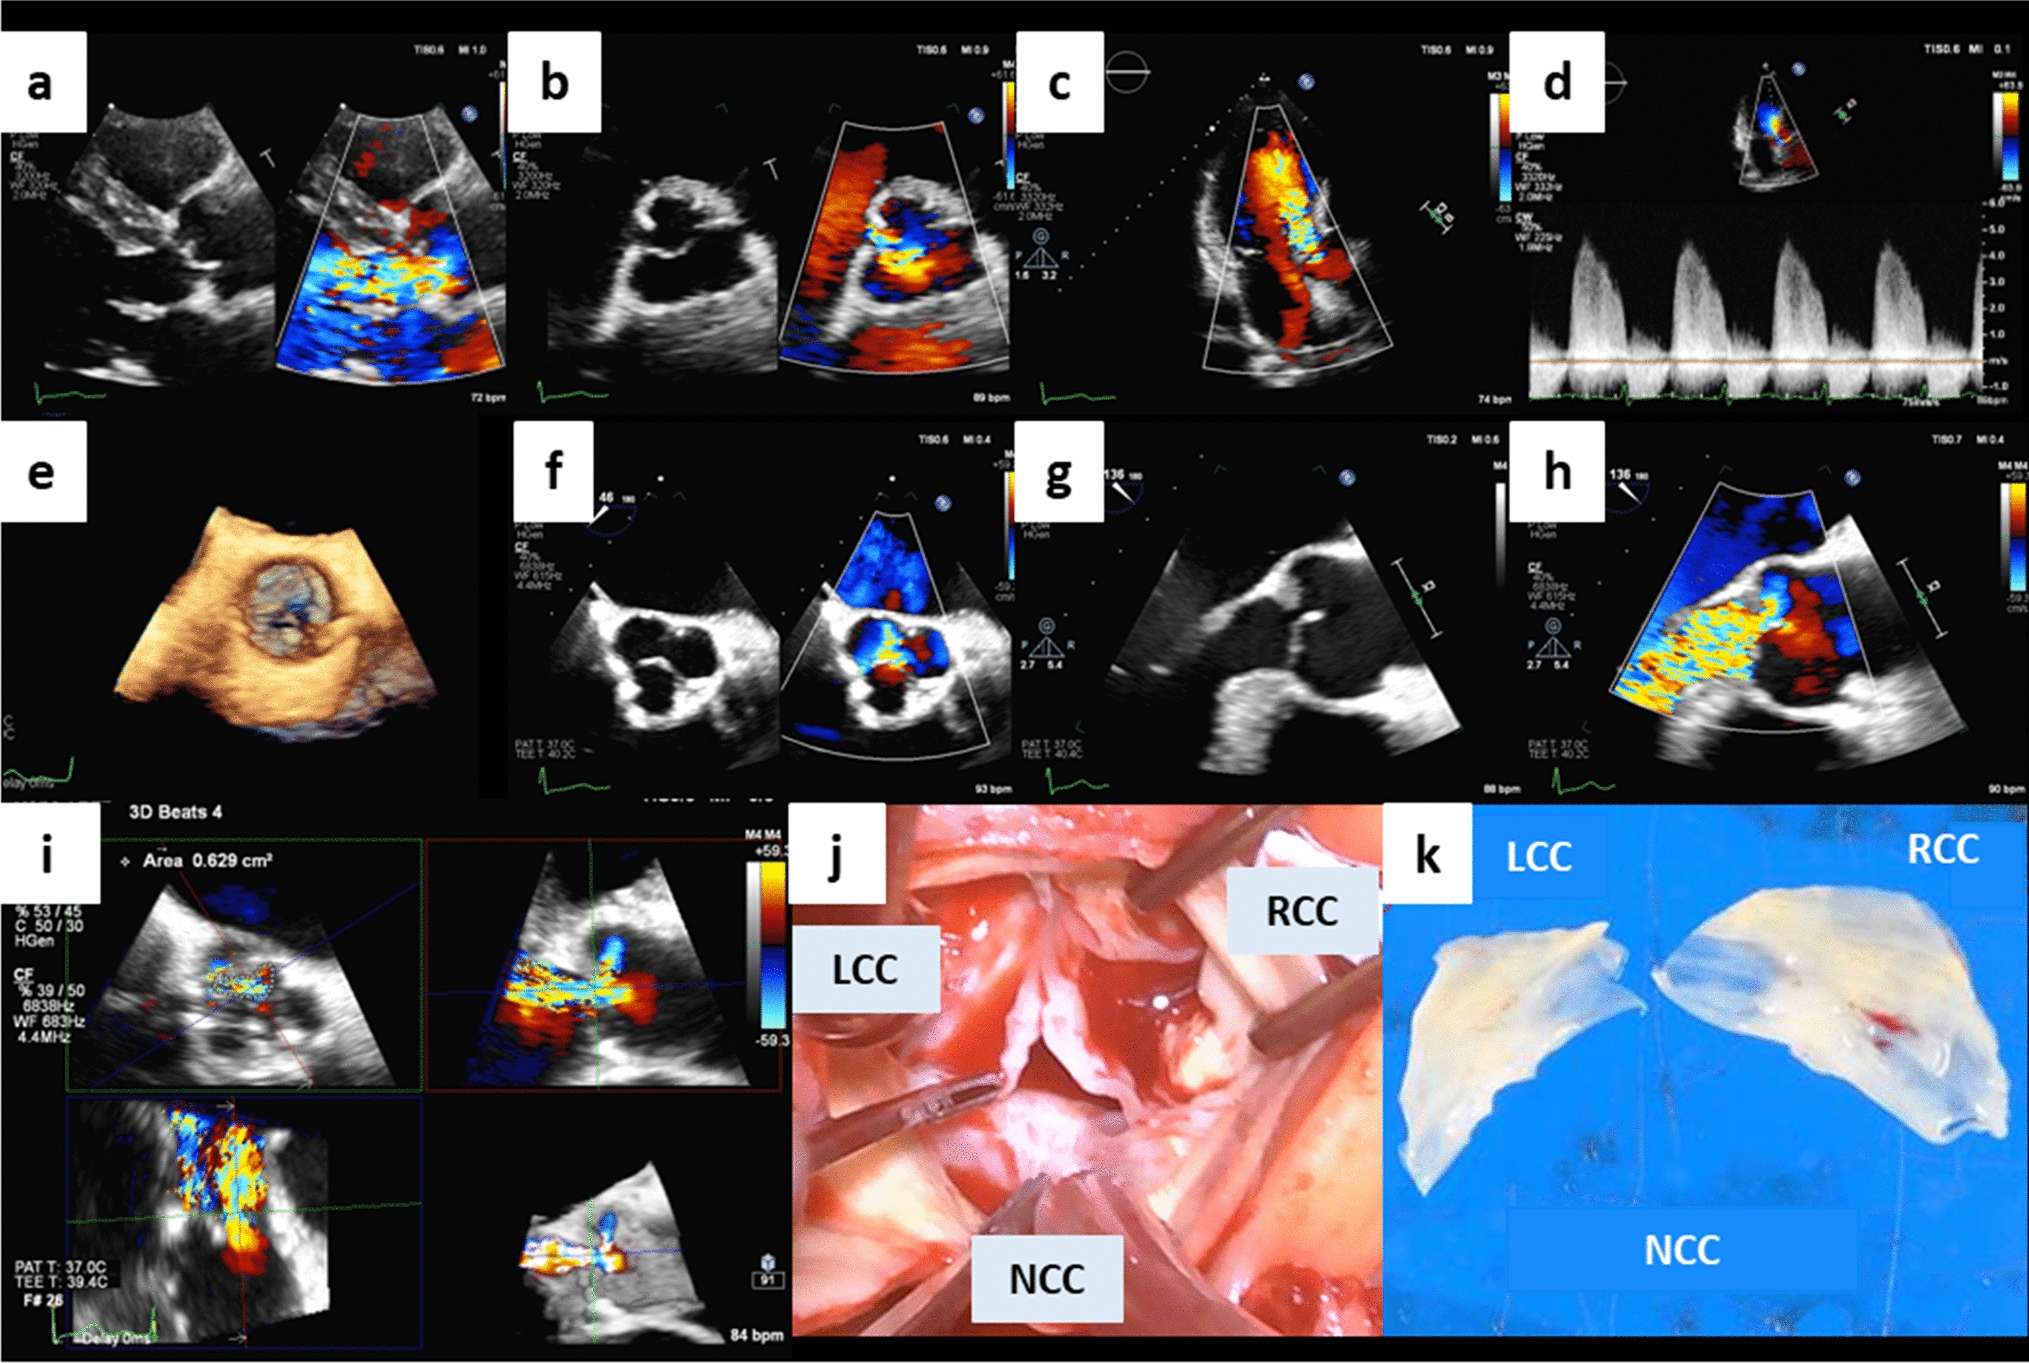 Extreme shortening of non-coronary cusp of the aortic valve detected by transesophageal echocardiography: a case report